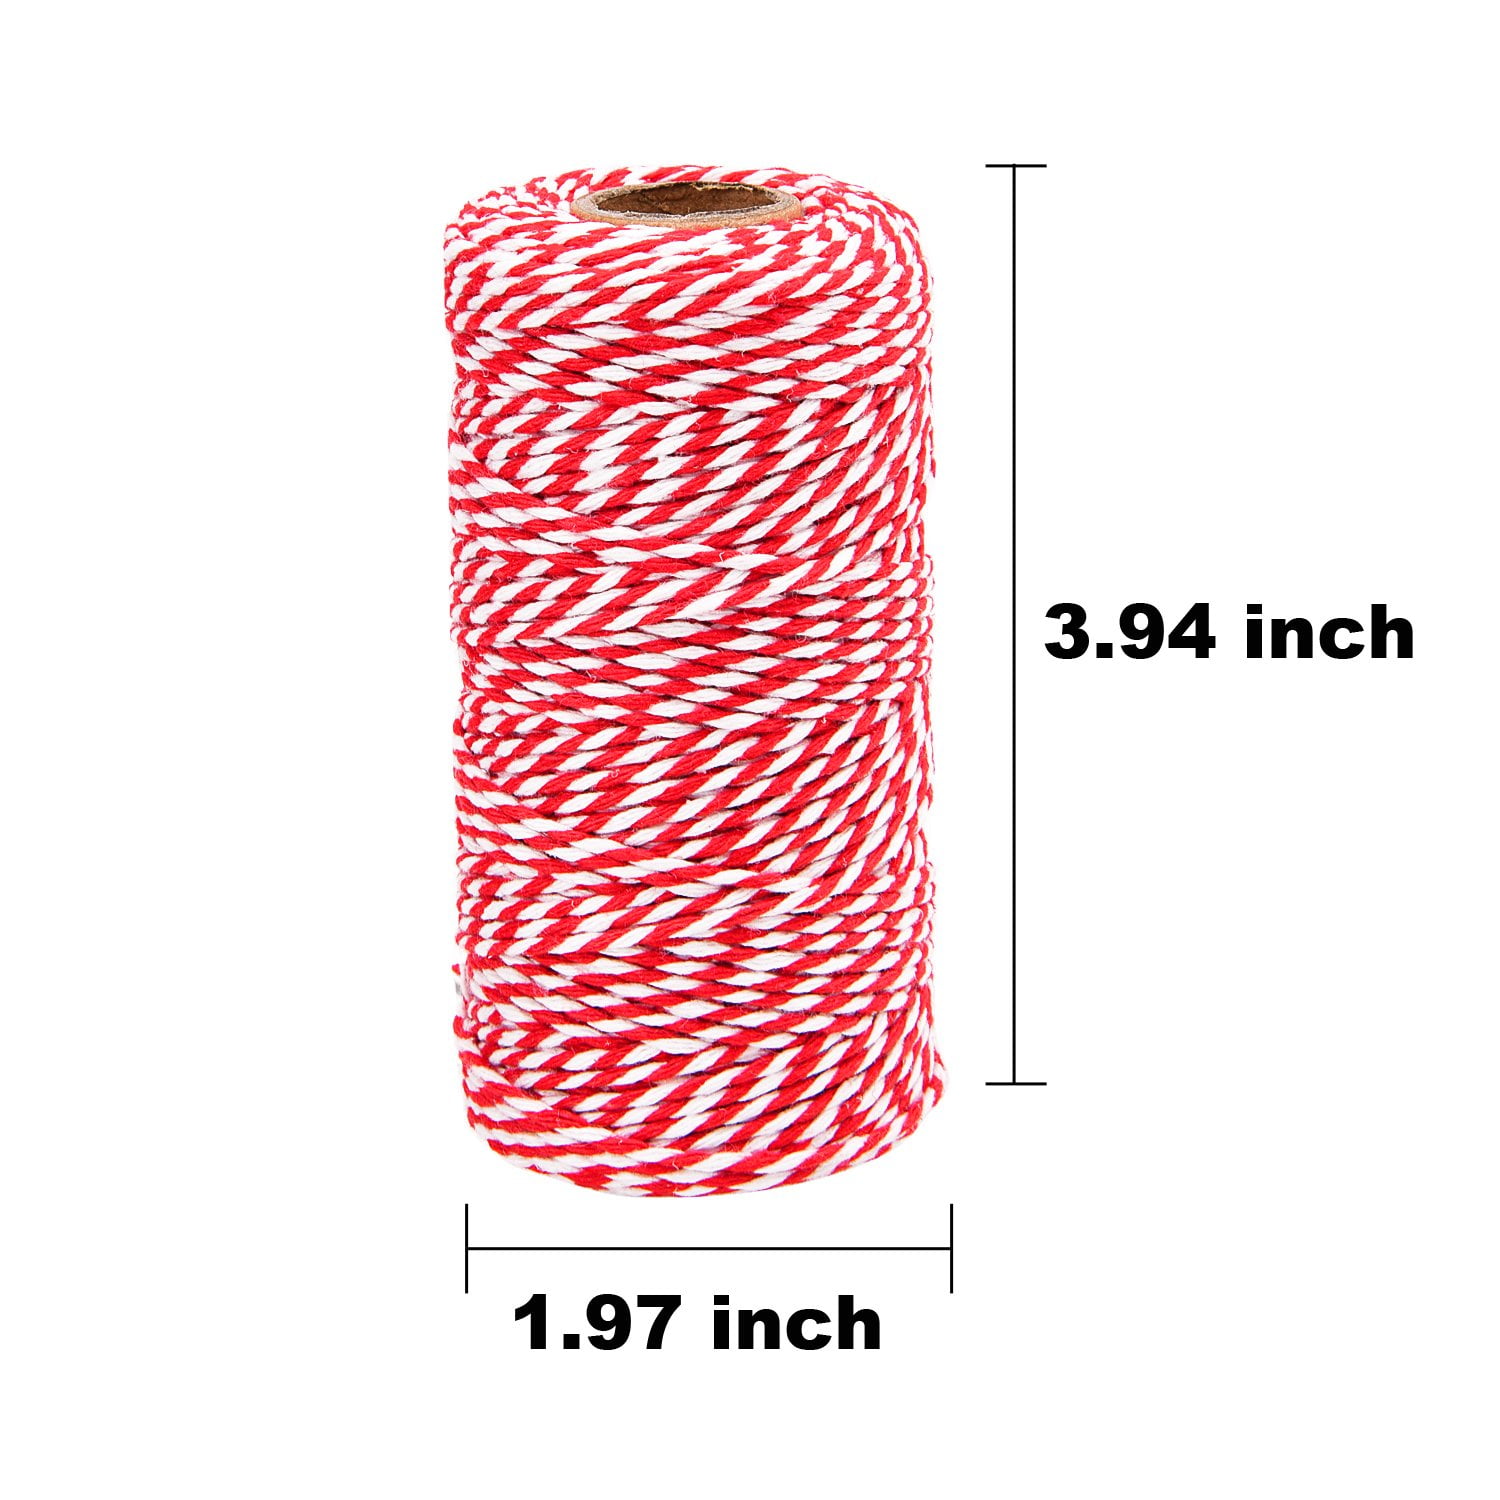  Vivifying Red and White Twine, 656 Feet 2mm Cotton